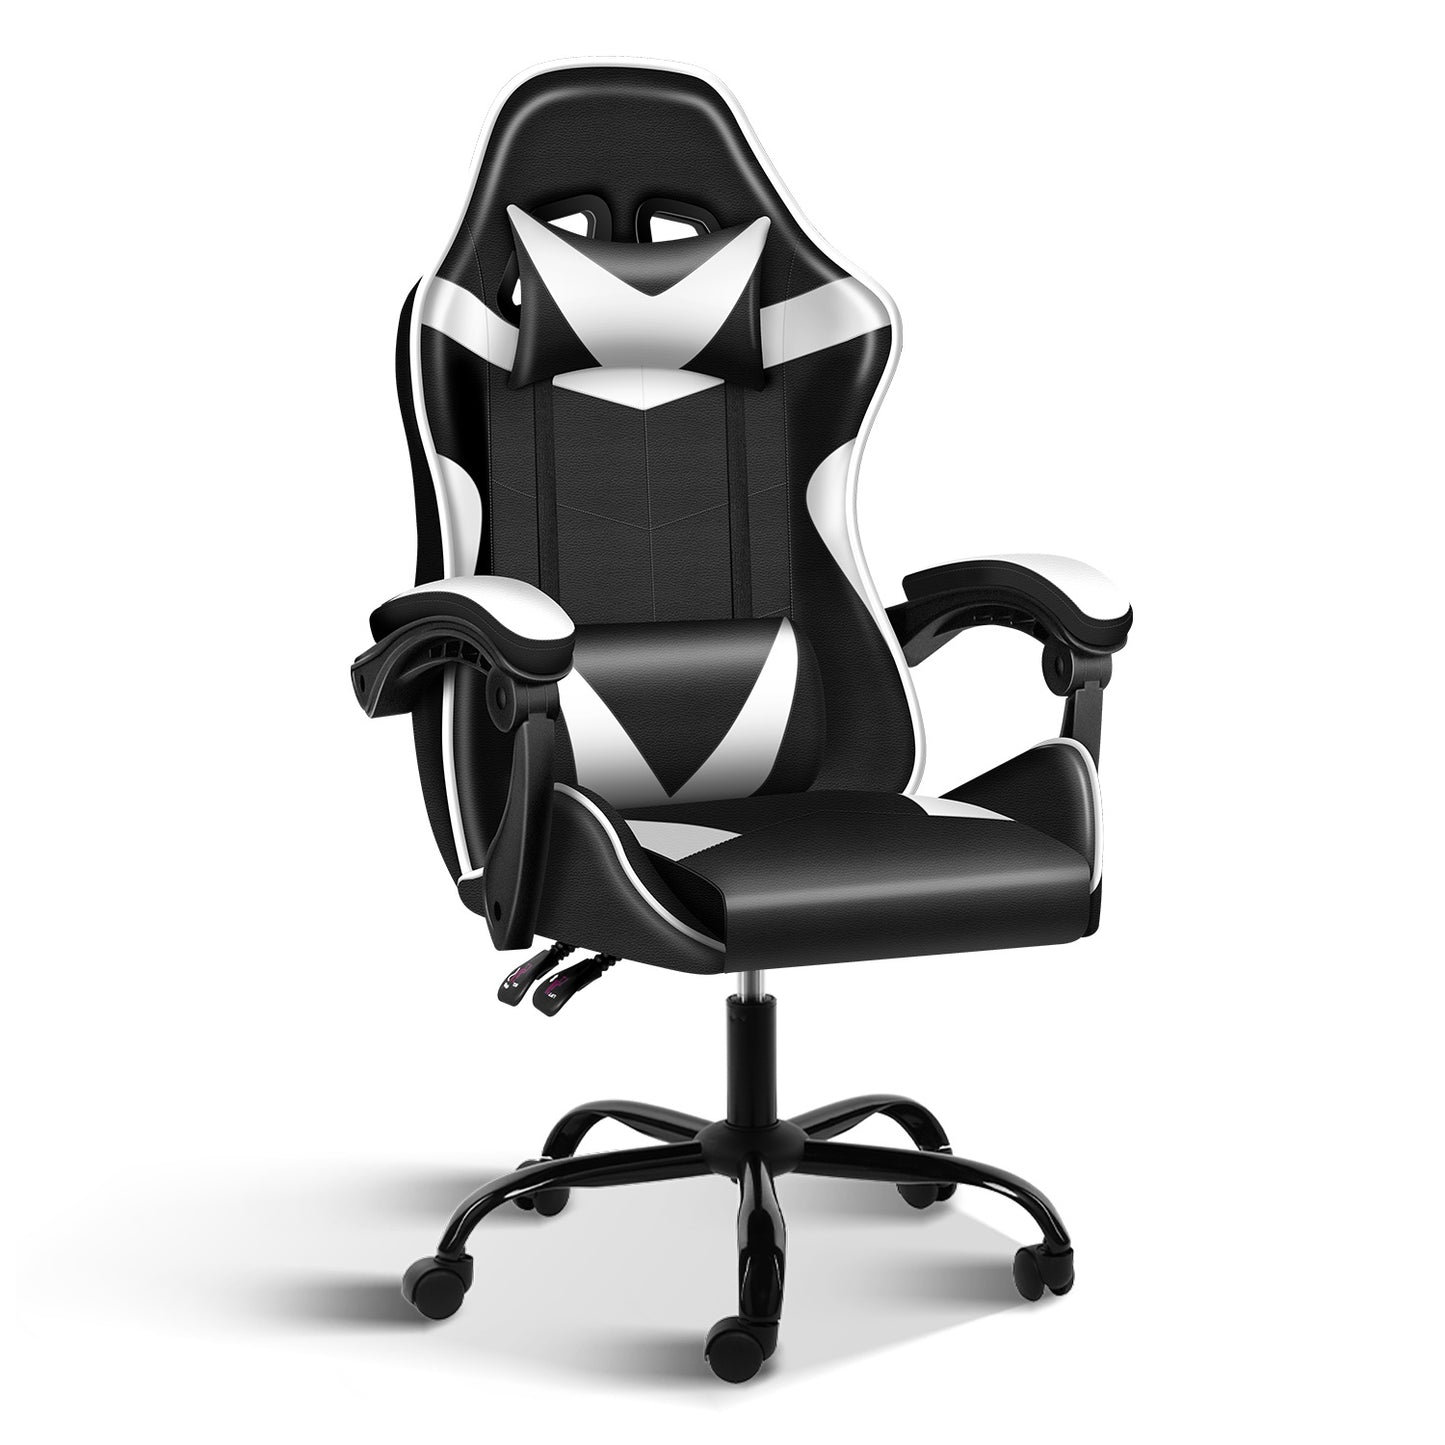 Racing Video Backrest and Seat Height Recliner Gaming Office High Back Computer Ergonomic Adjustable Swivel Chair, Without footrest, Black/White